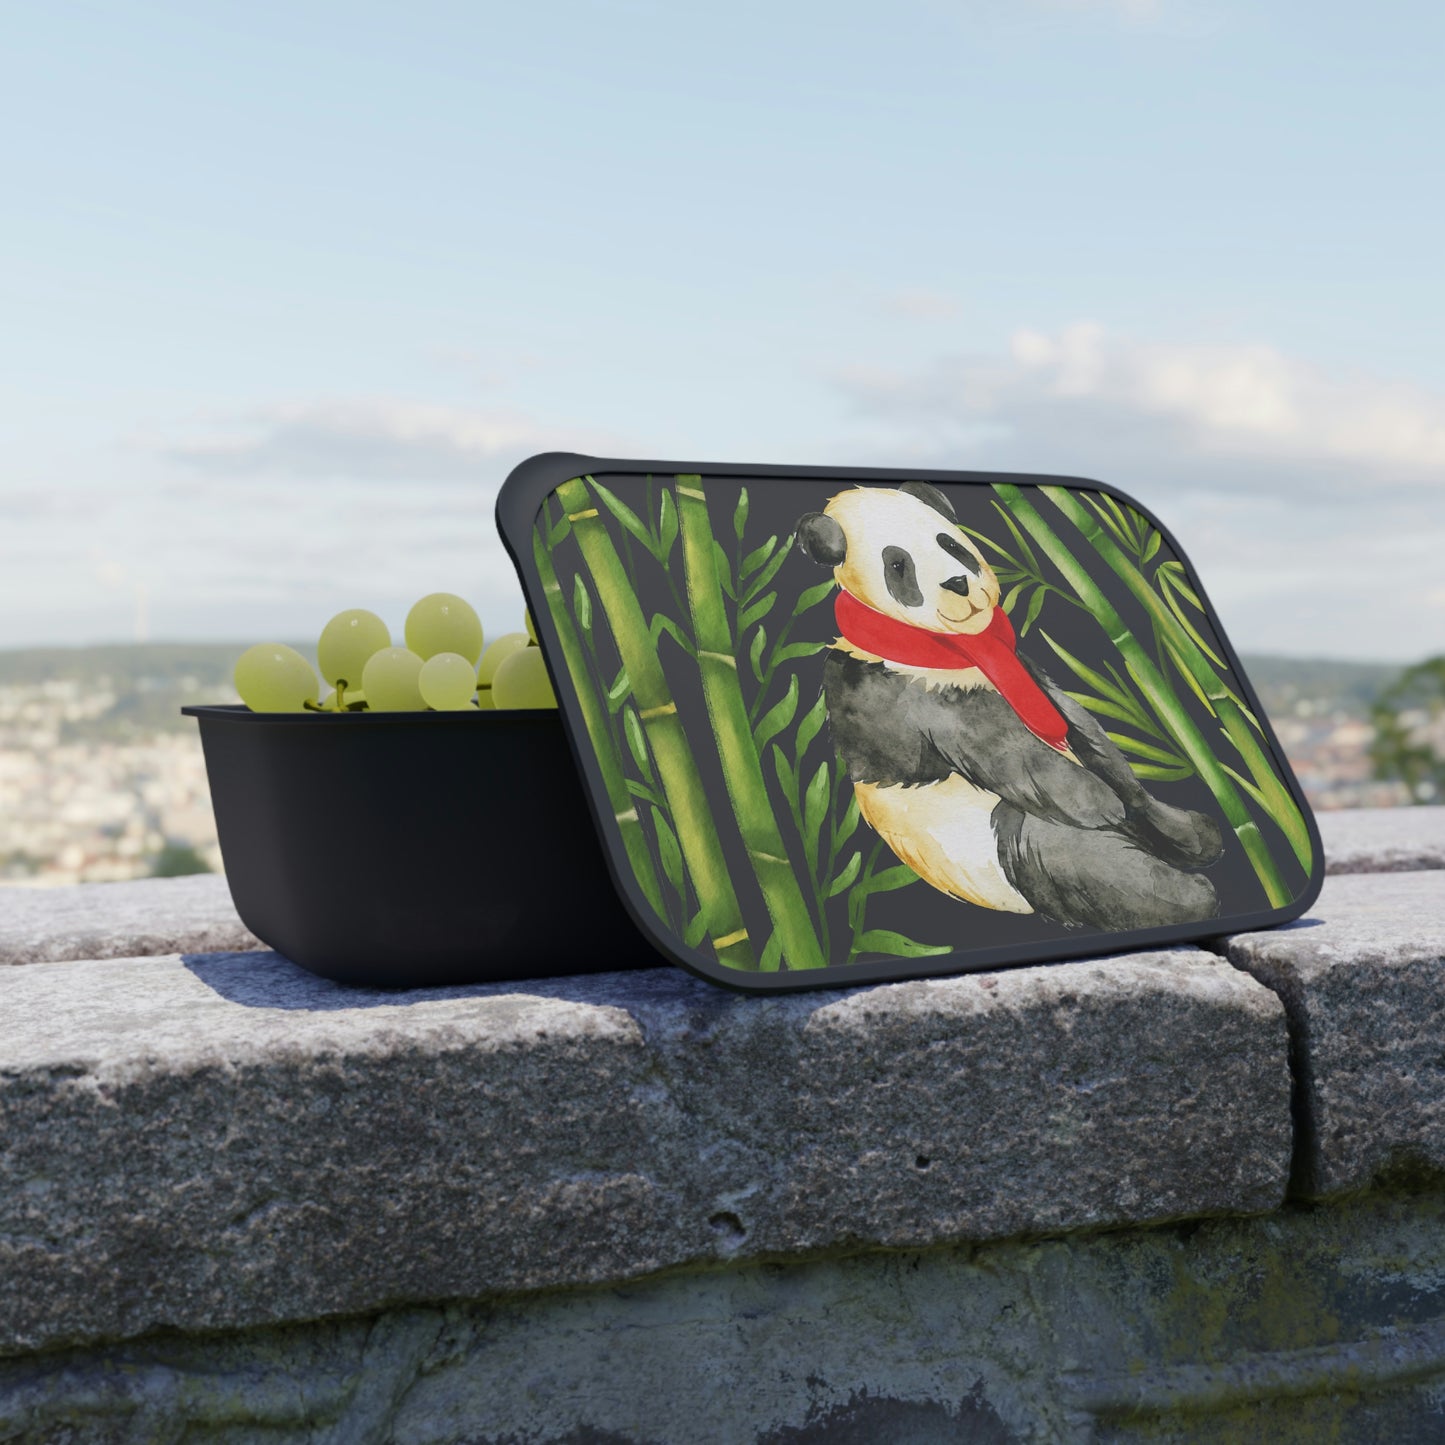 Adorable Panda Bear design Bento Box/Lunch Box  PLA  with Band and Utensils